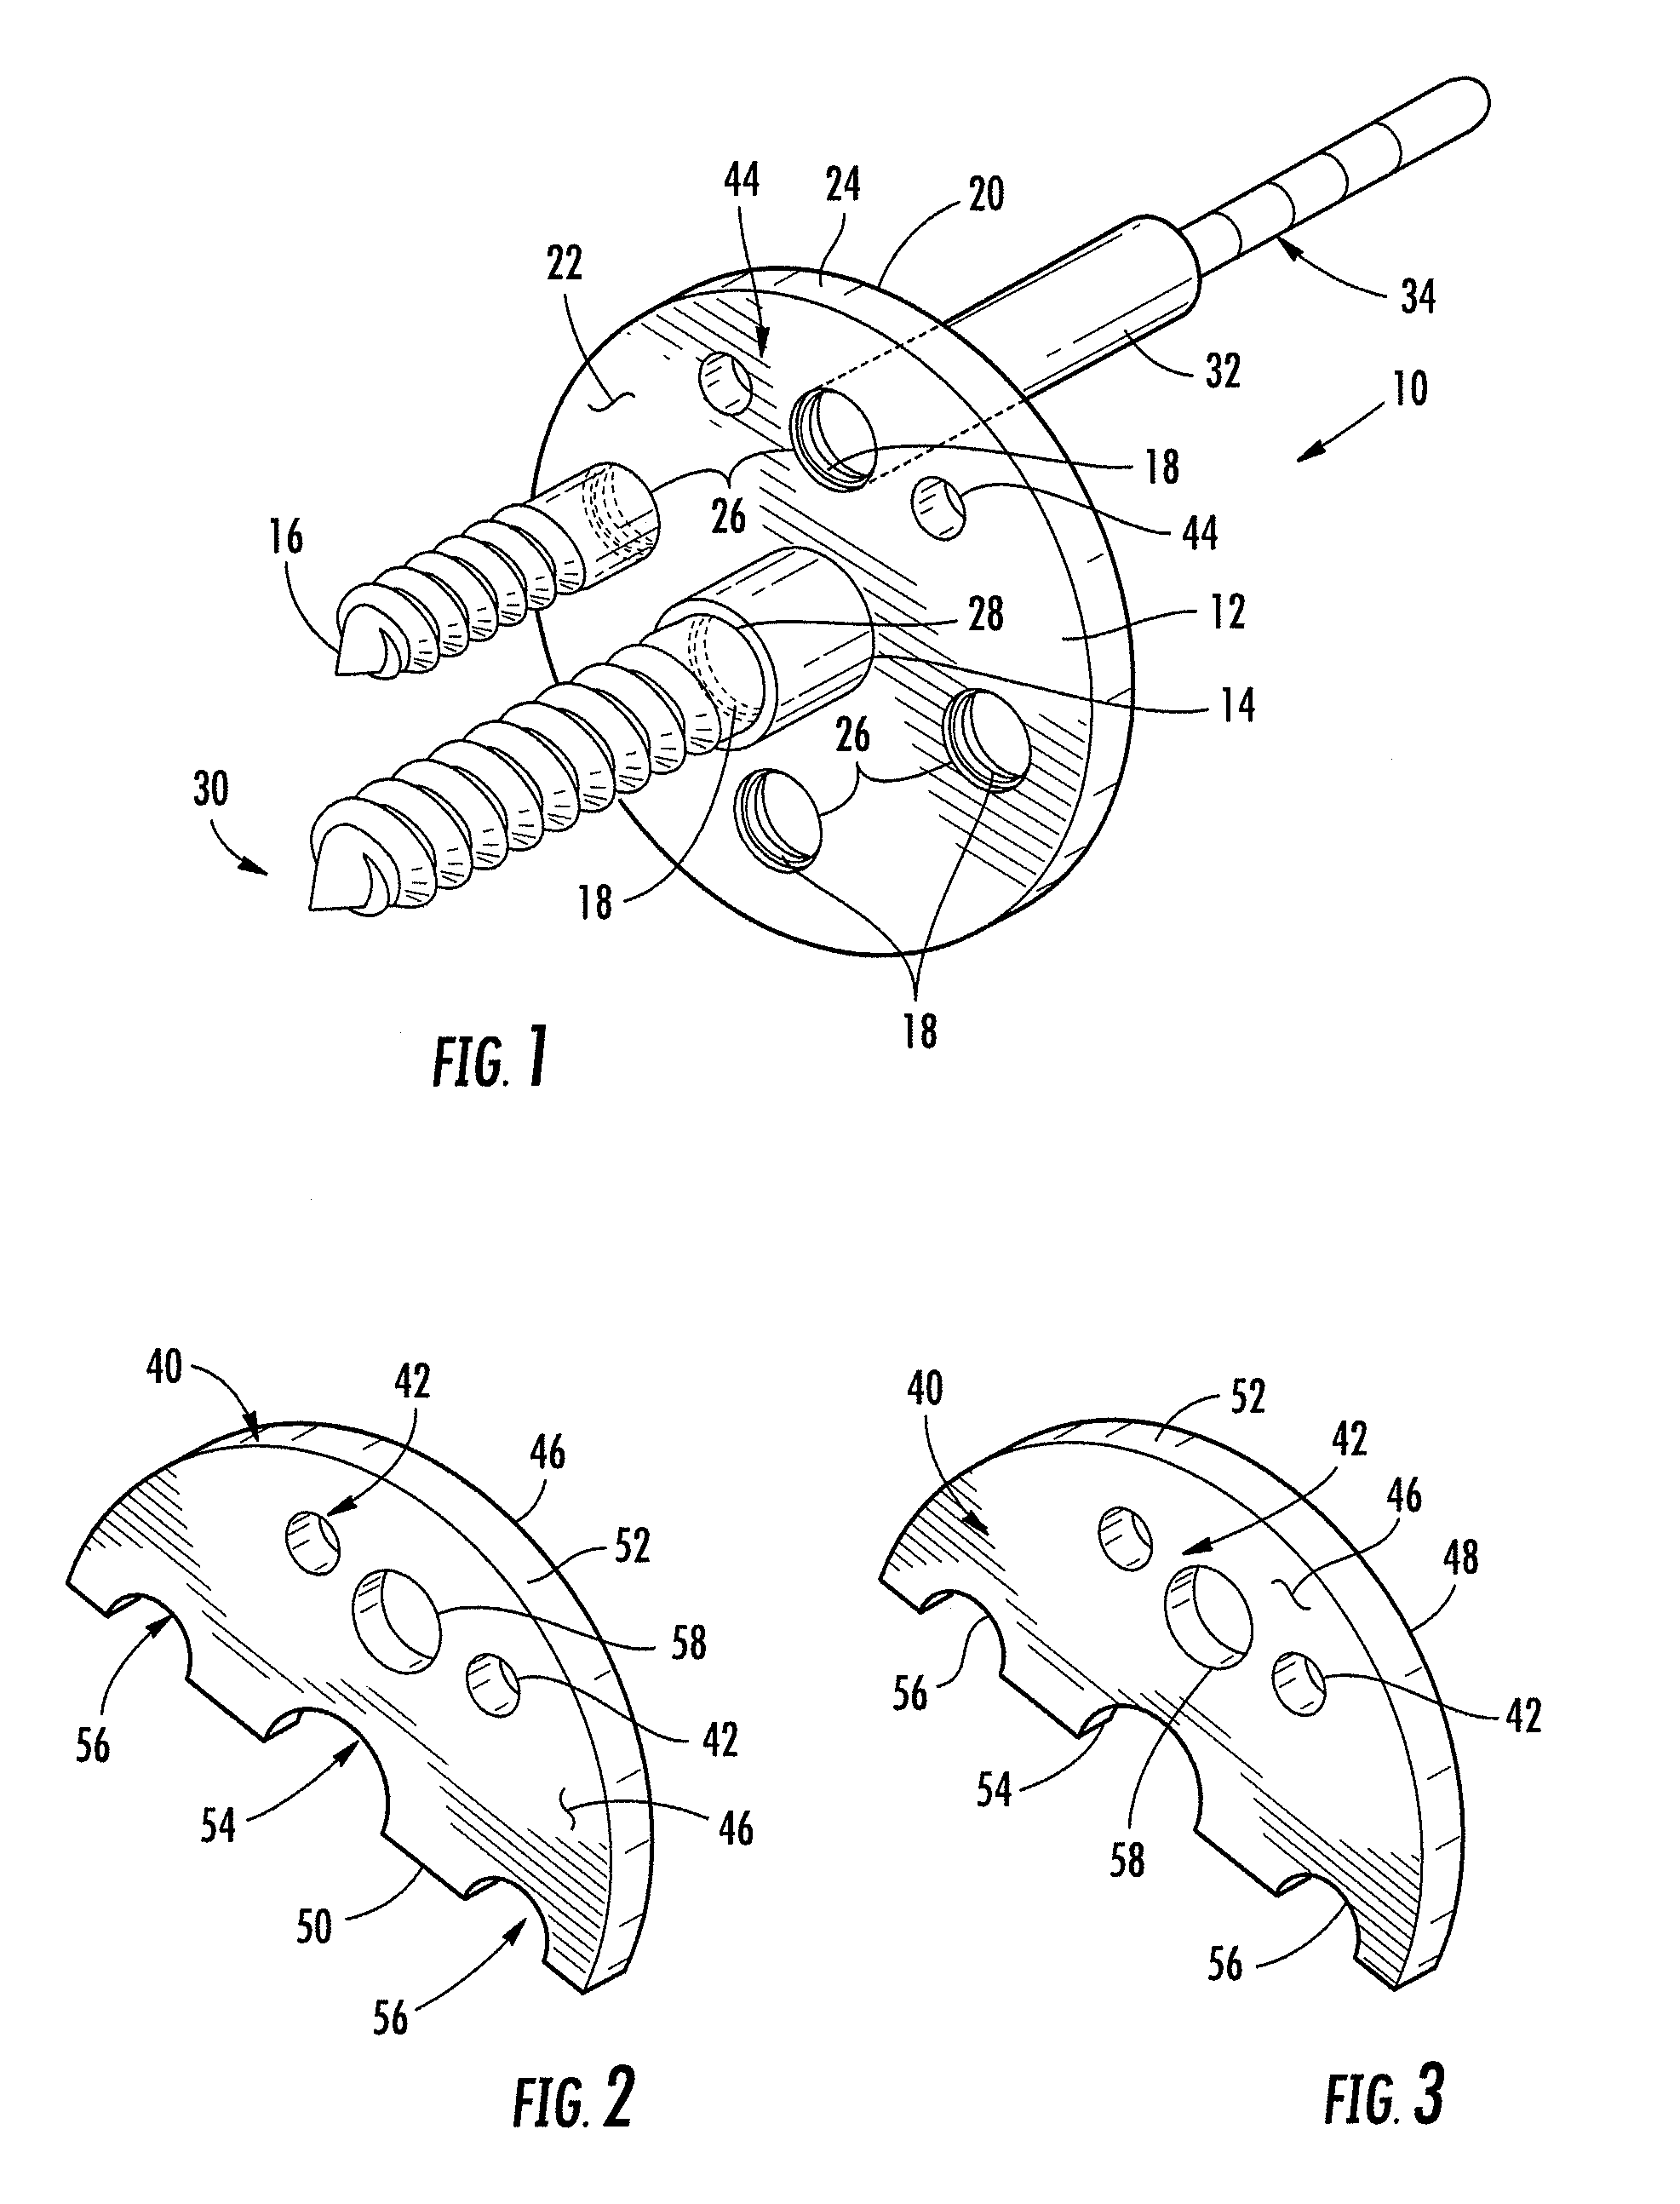 Base plate system for shoulder arthroplasty and method of using the same